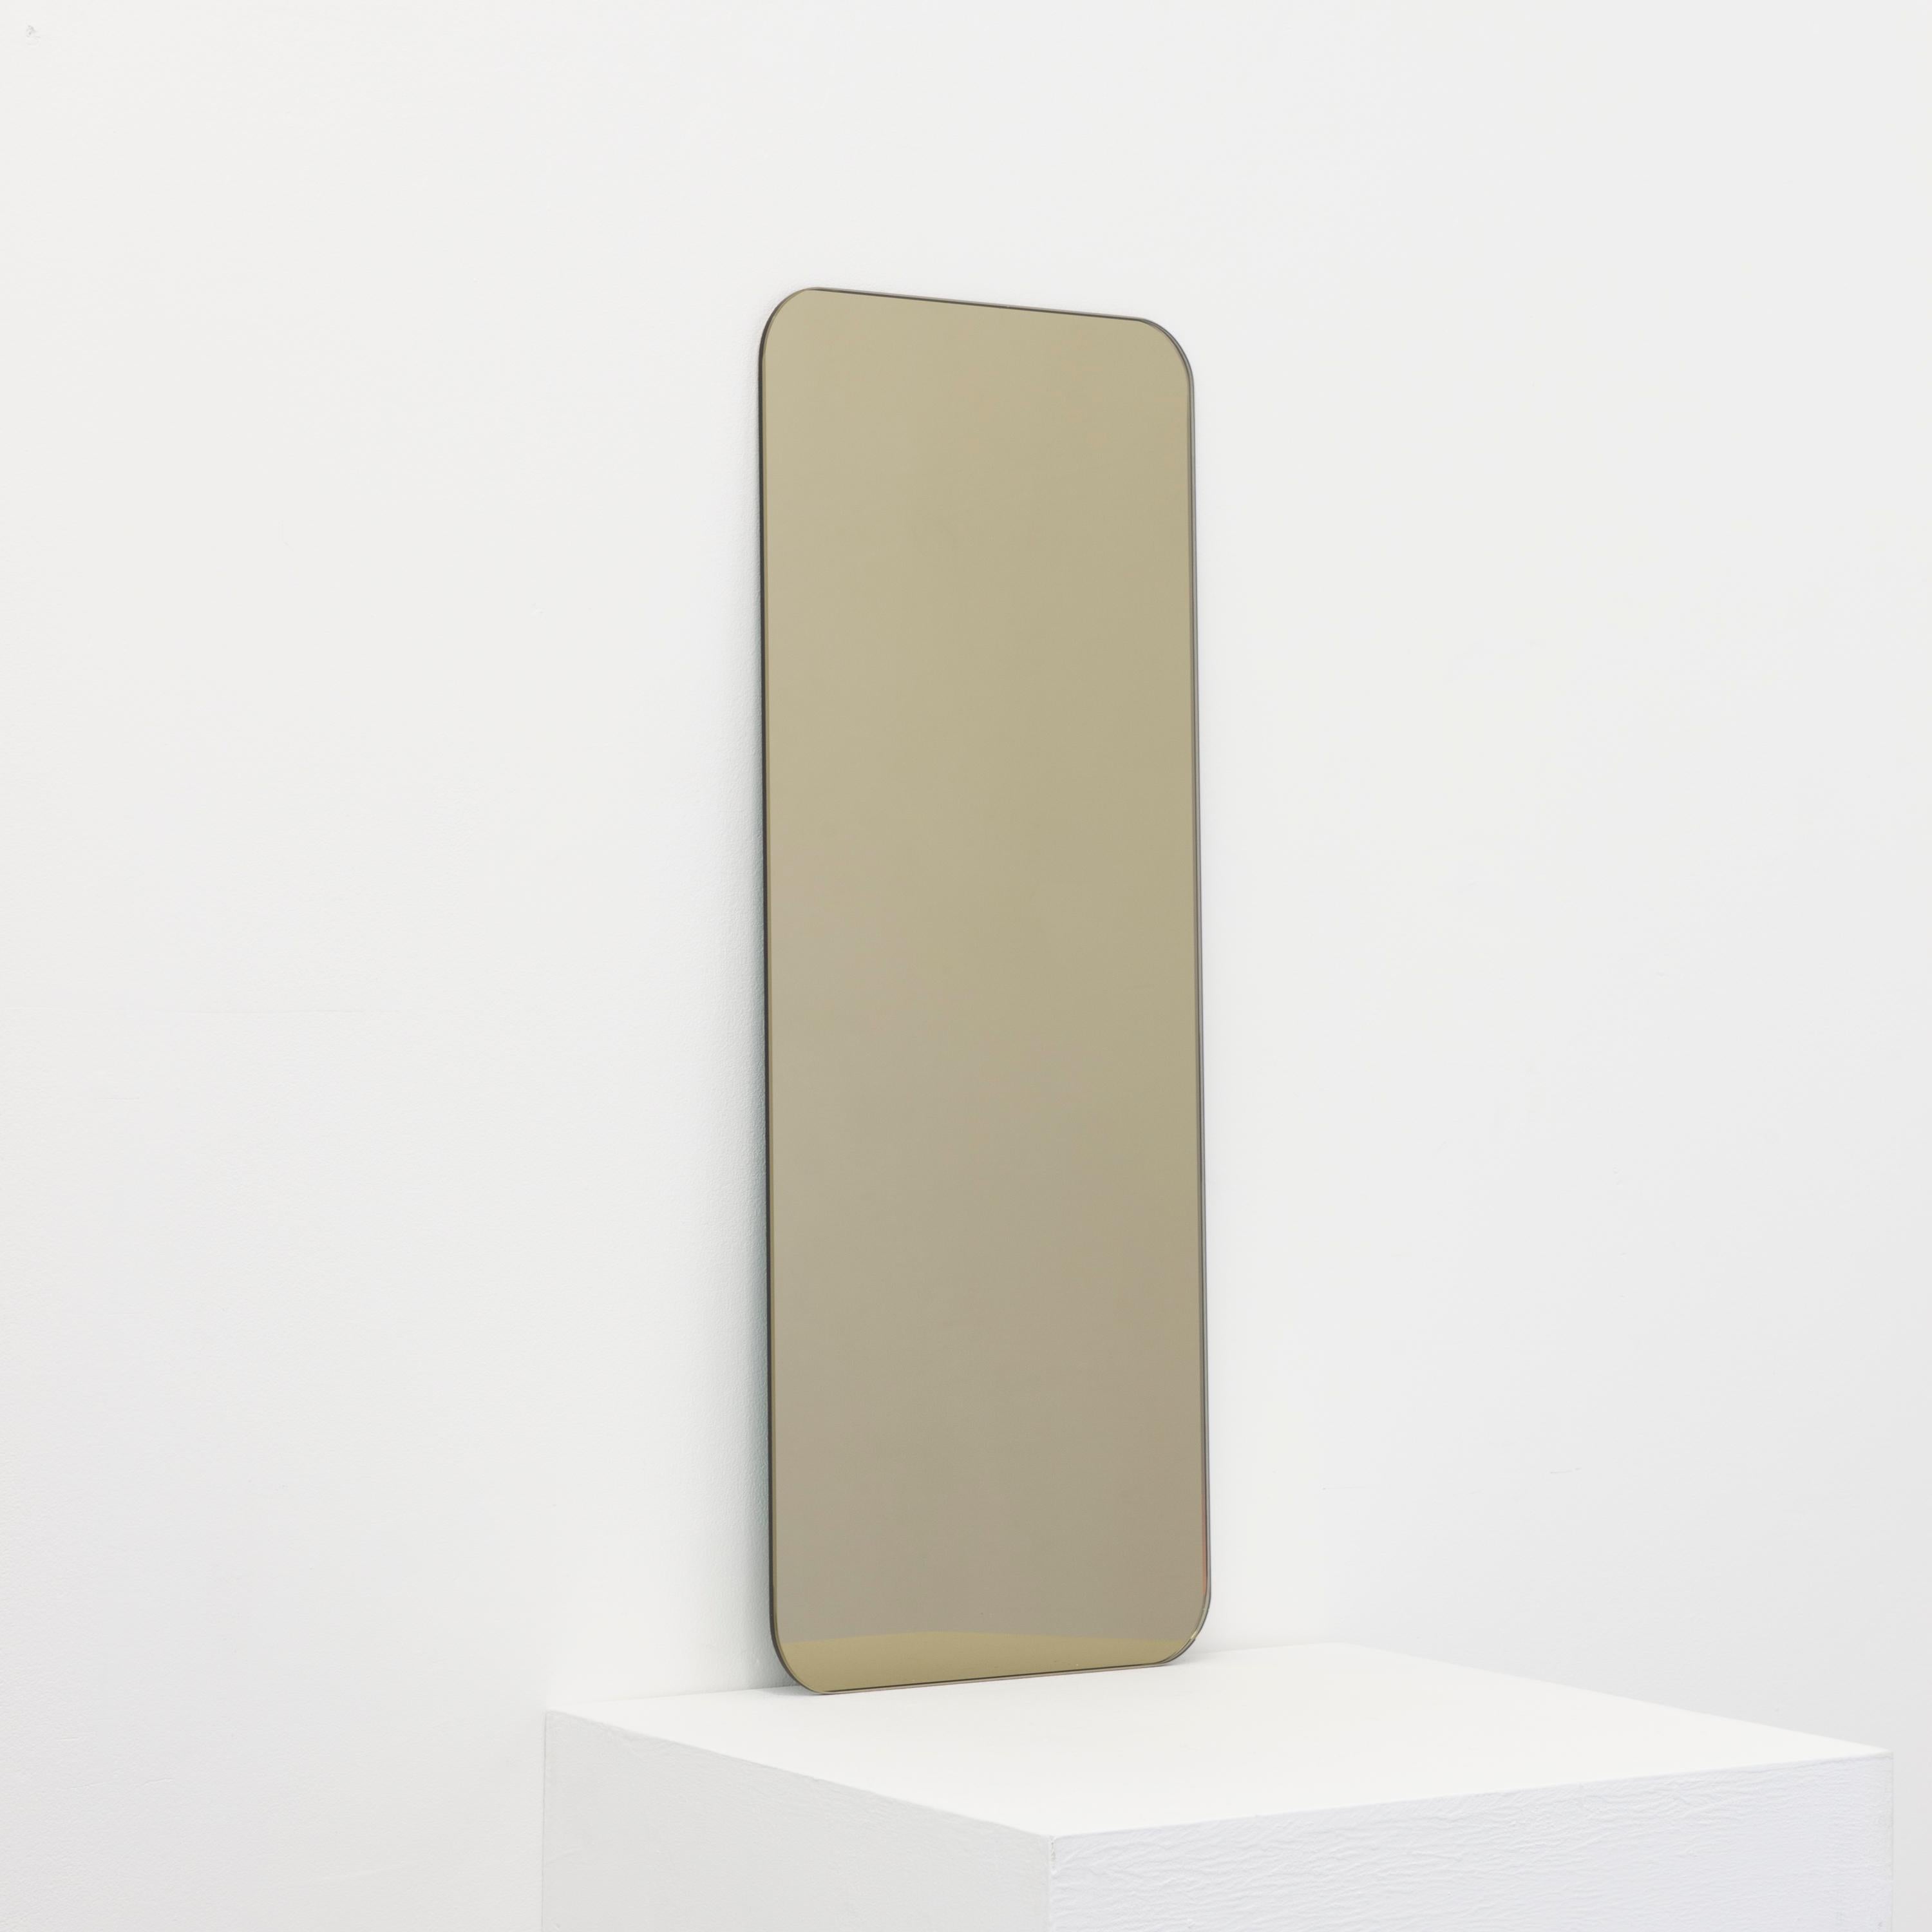 Minimalist rectangular shaped frameless bronze tinted mirror with a floating effect. Quality design that ensures the mirror sits perfectly parallel to the wall. Designed and made in London, UK.

Fitted with professional plates not visible once